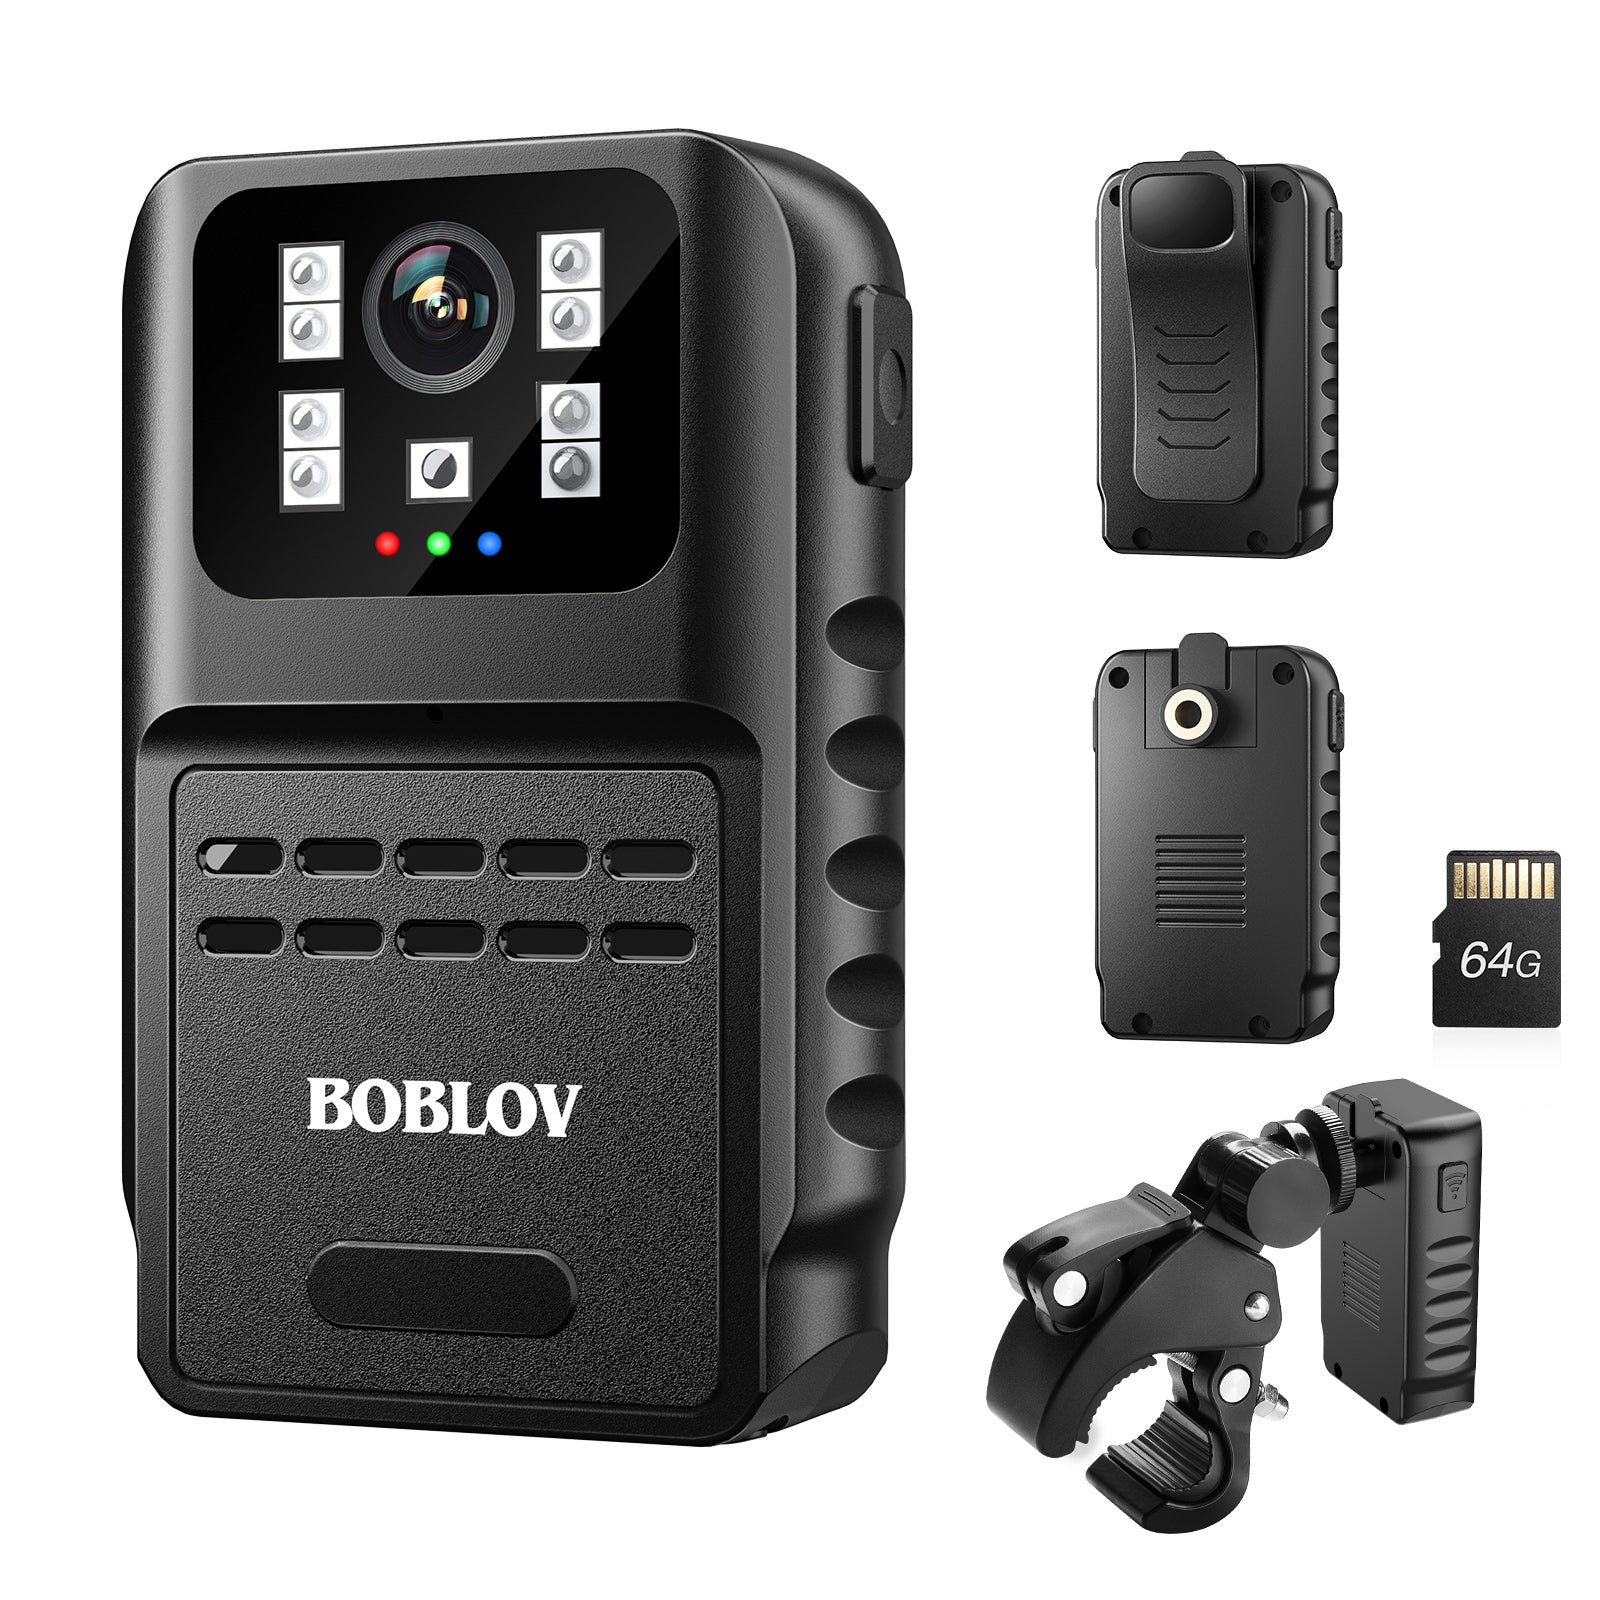 880W small body camera with 1080P resolution and night vision feature2